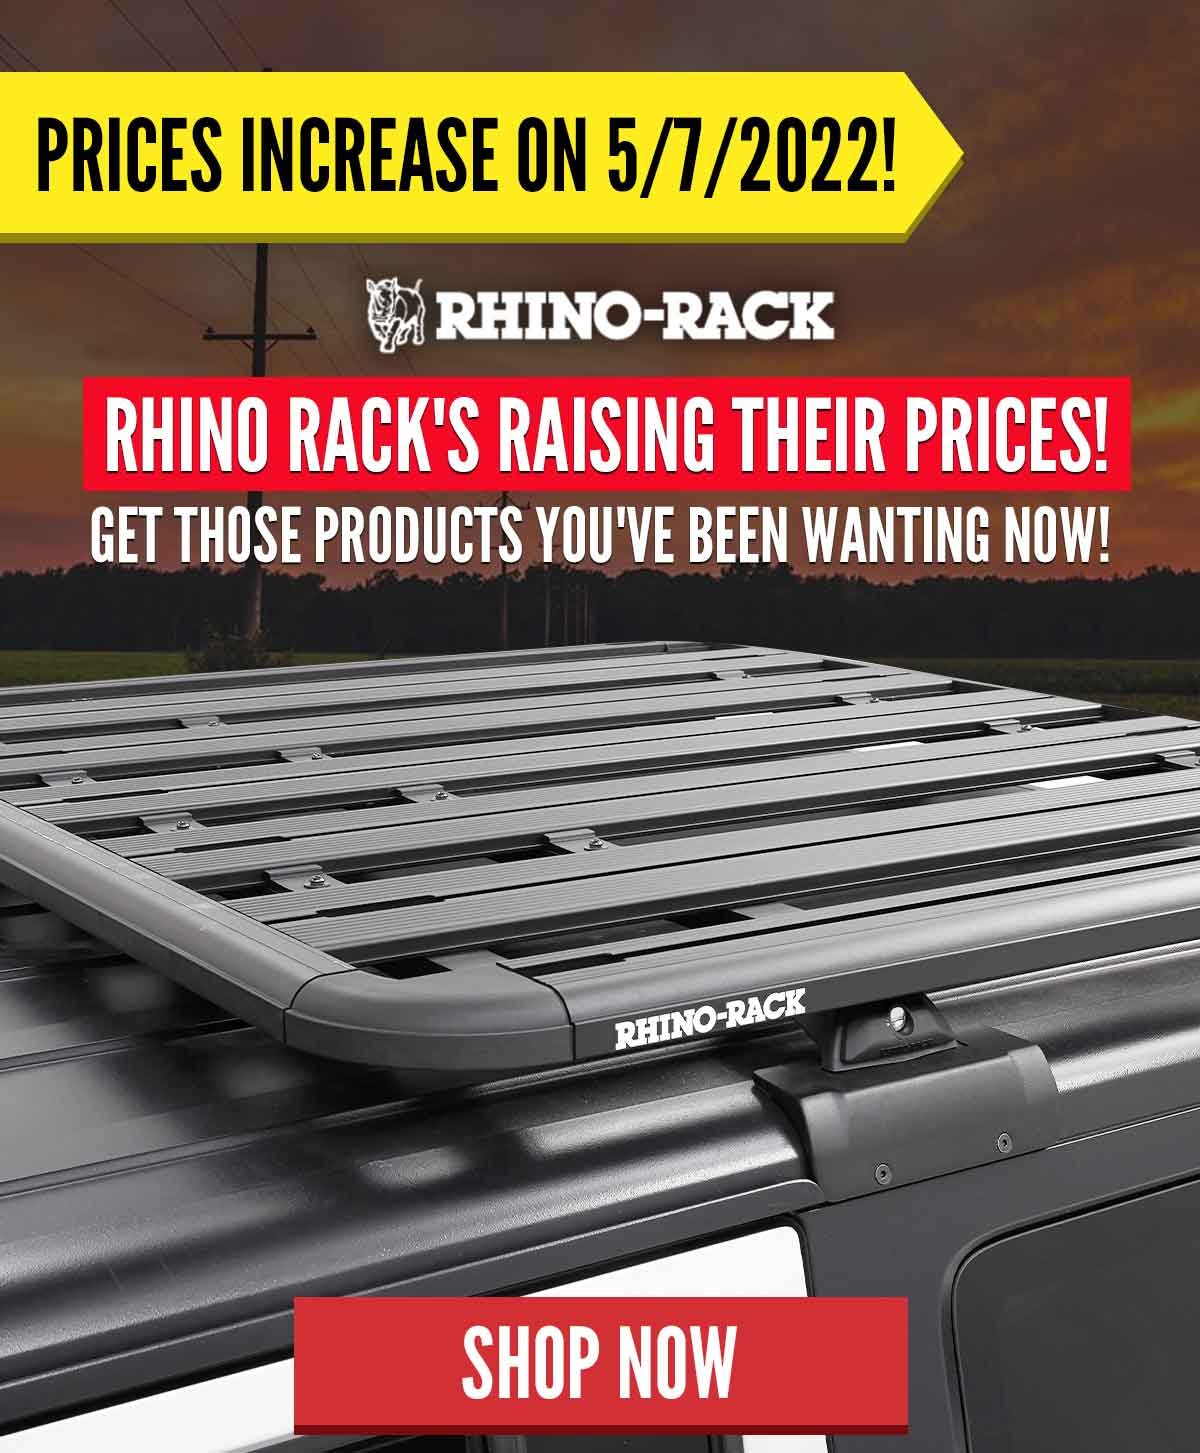 Rhino Rack's raising their prices! Get those products you've been wanting now!